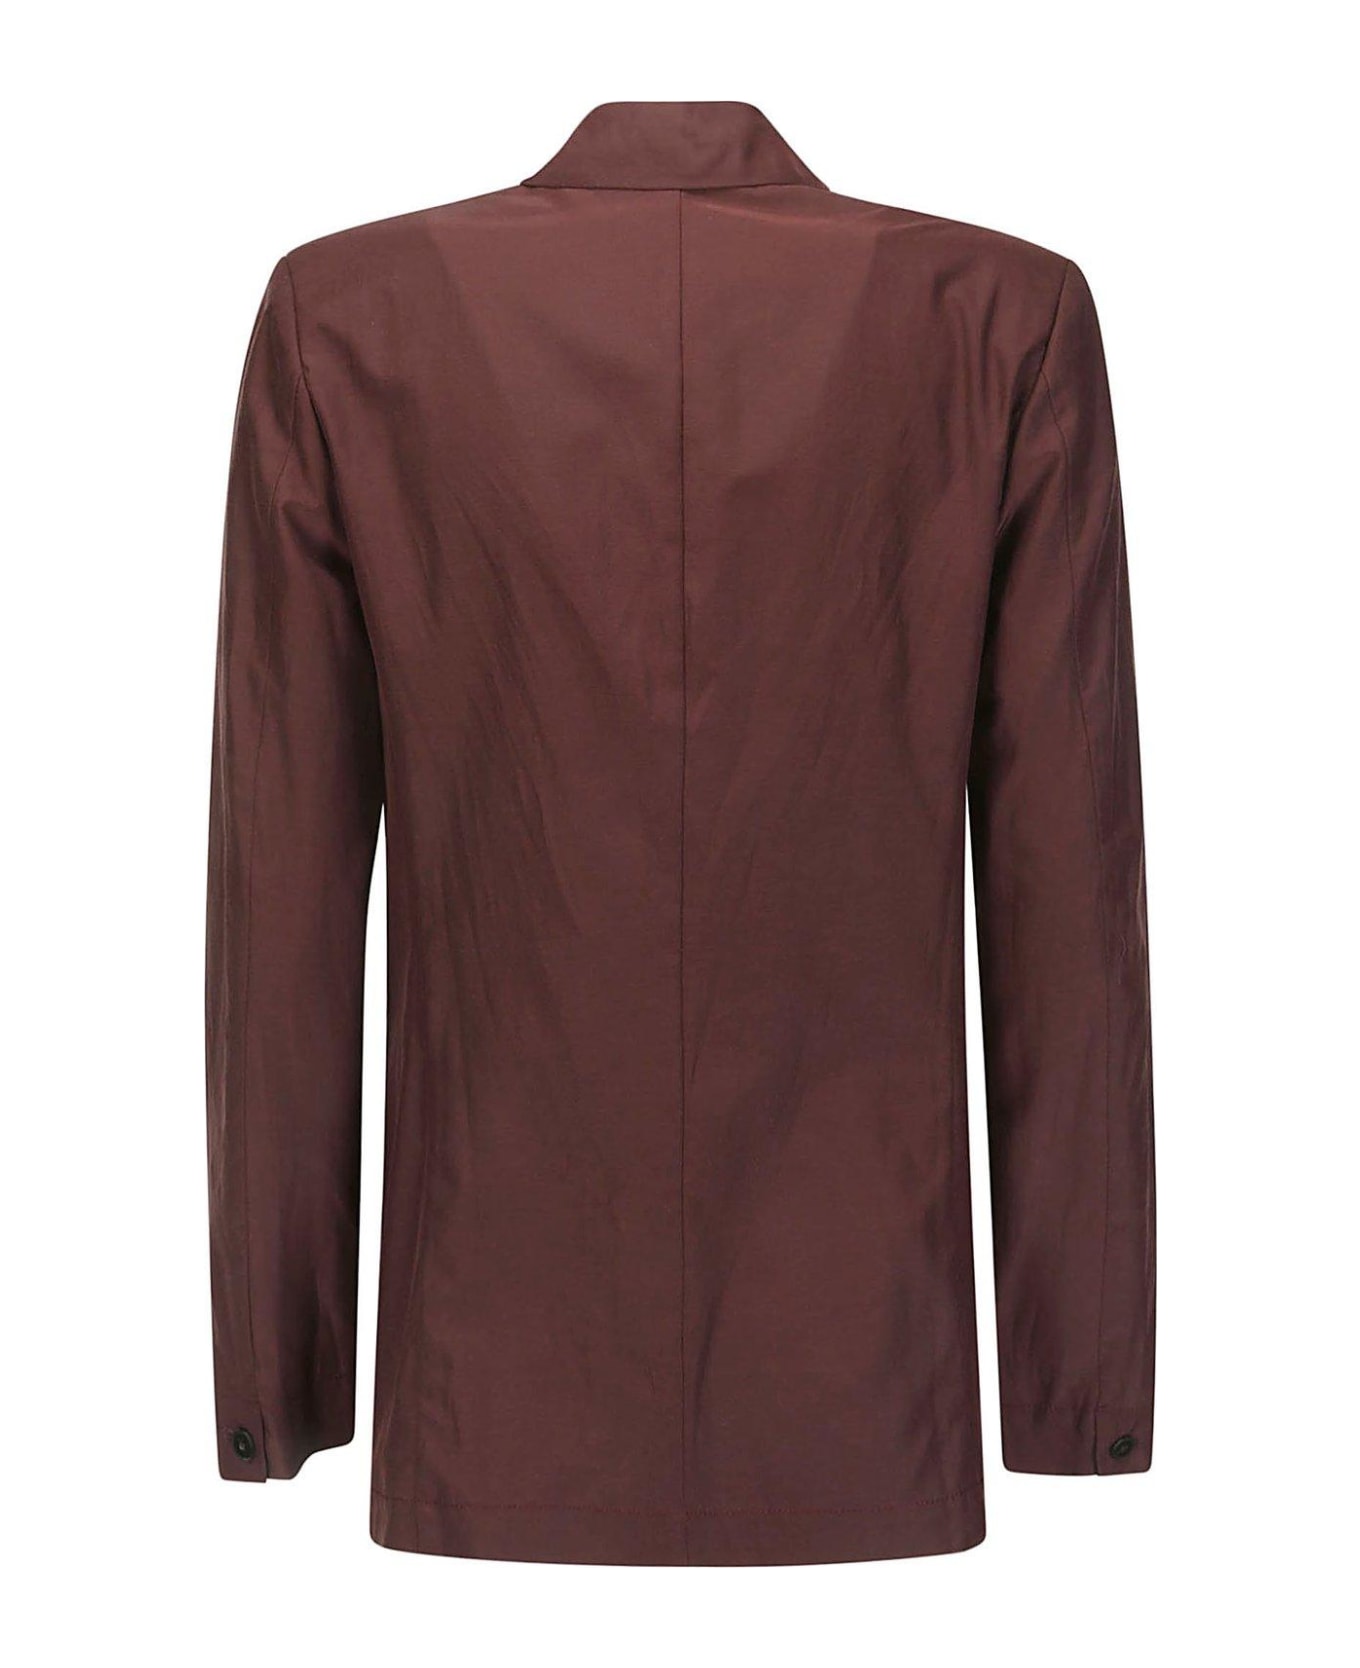 Forte_Forte Chic Boxy Jacket - Cacao